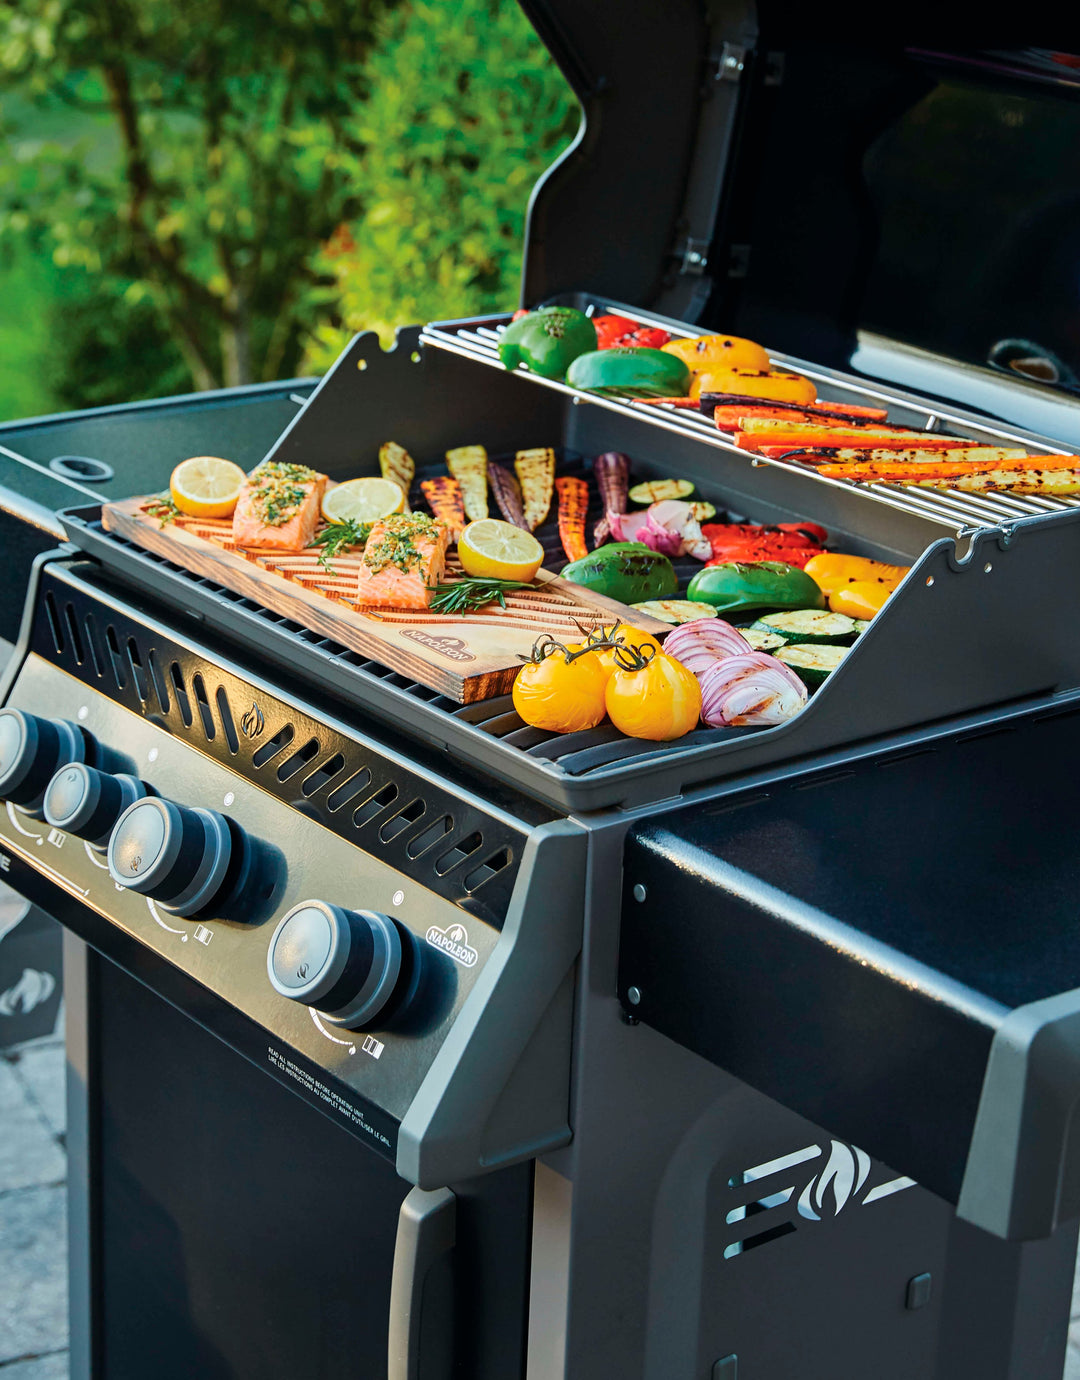 Napoleon - Rogue 425 Propane Gas Grill with Side Burner and Grill Cover - Black_2